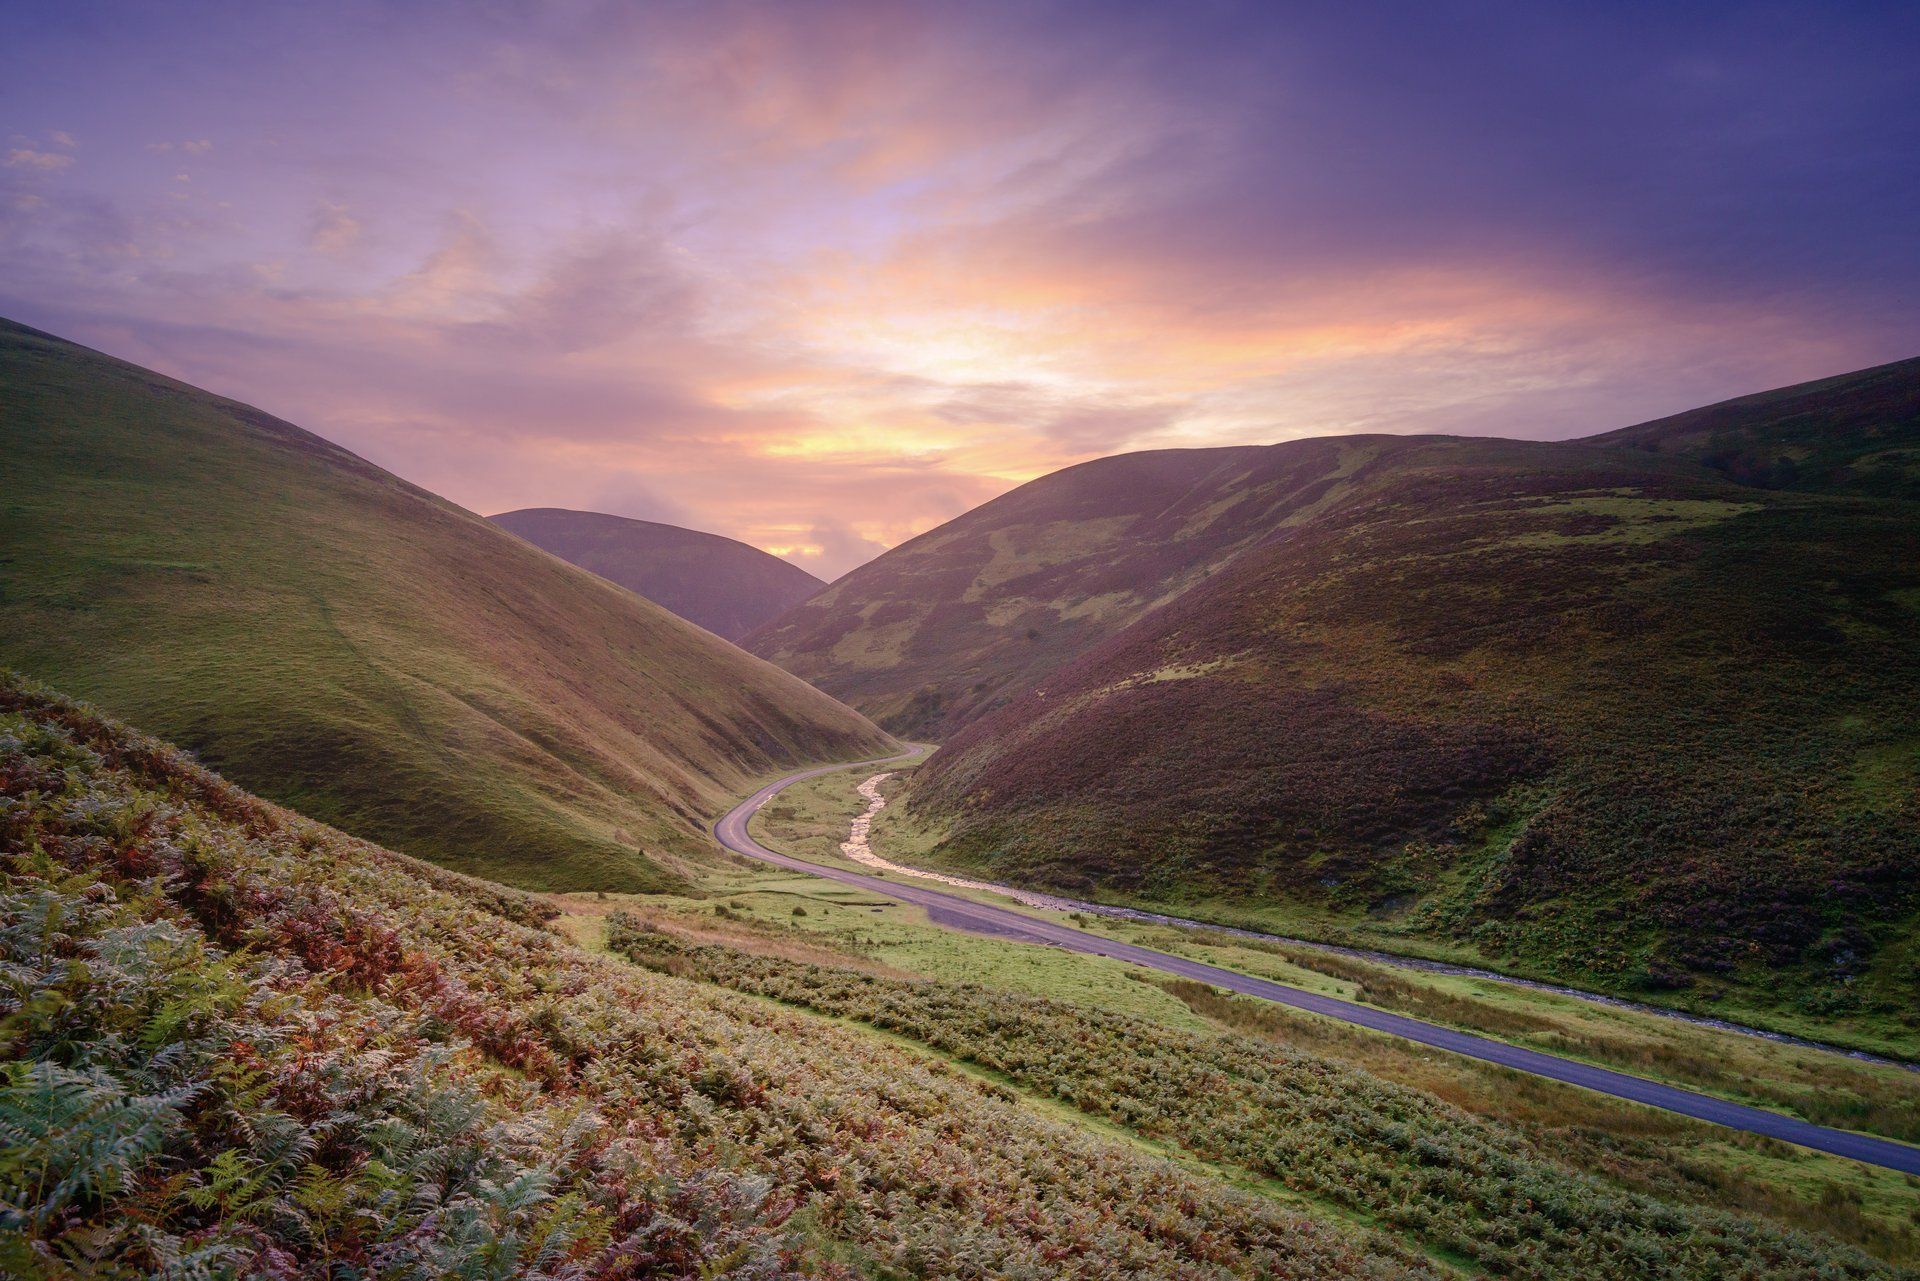 The sun sets over the beautiful roads of the south of Scotland,